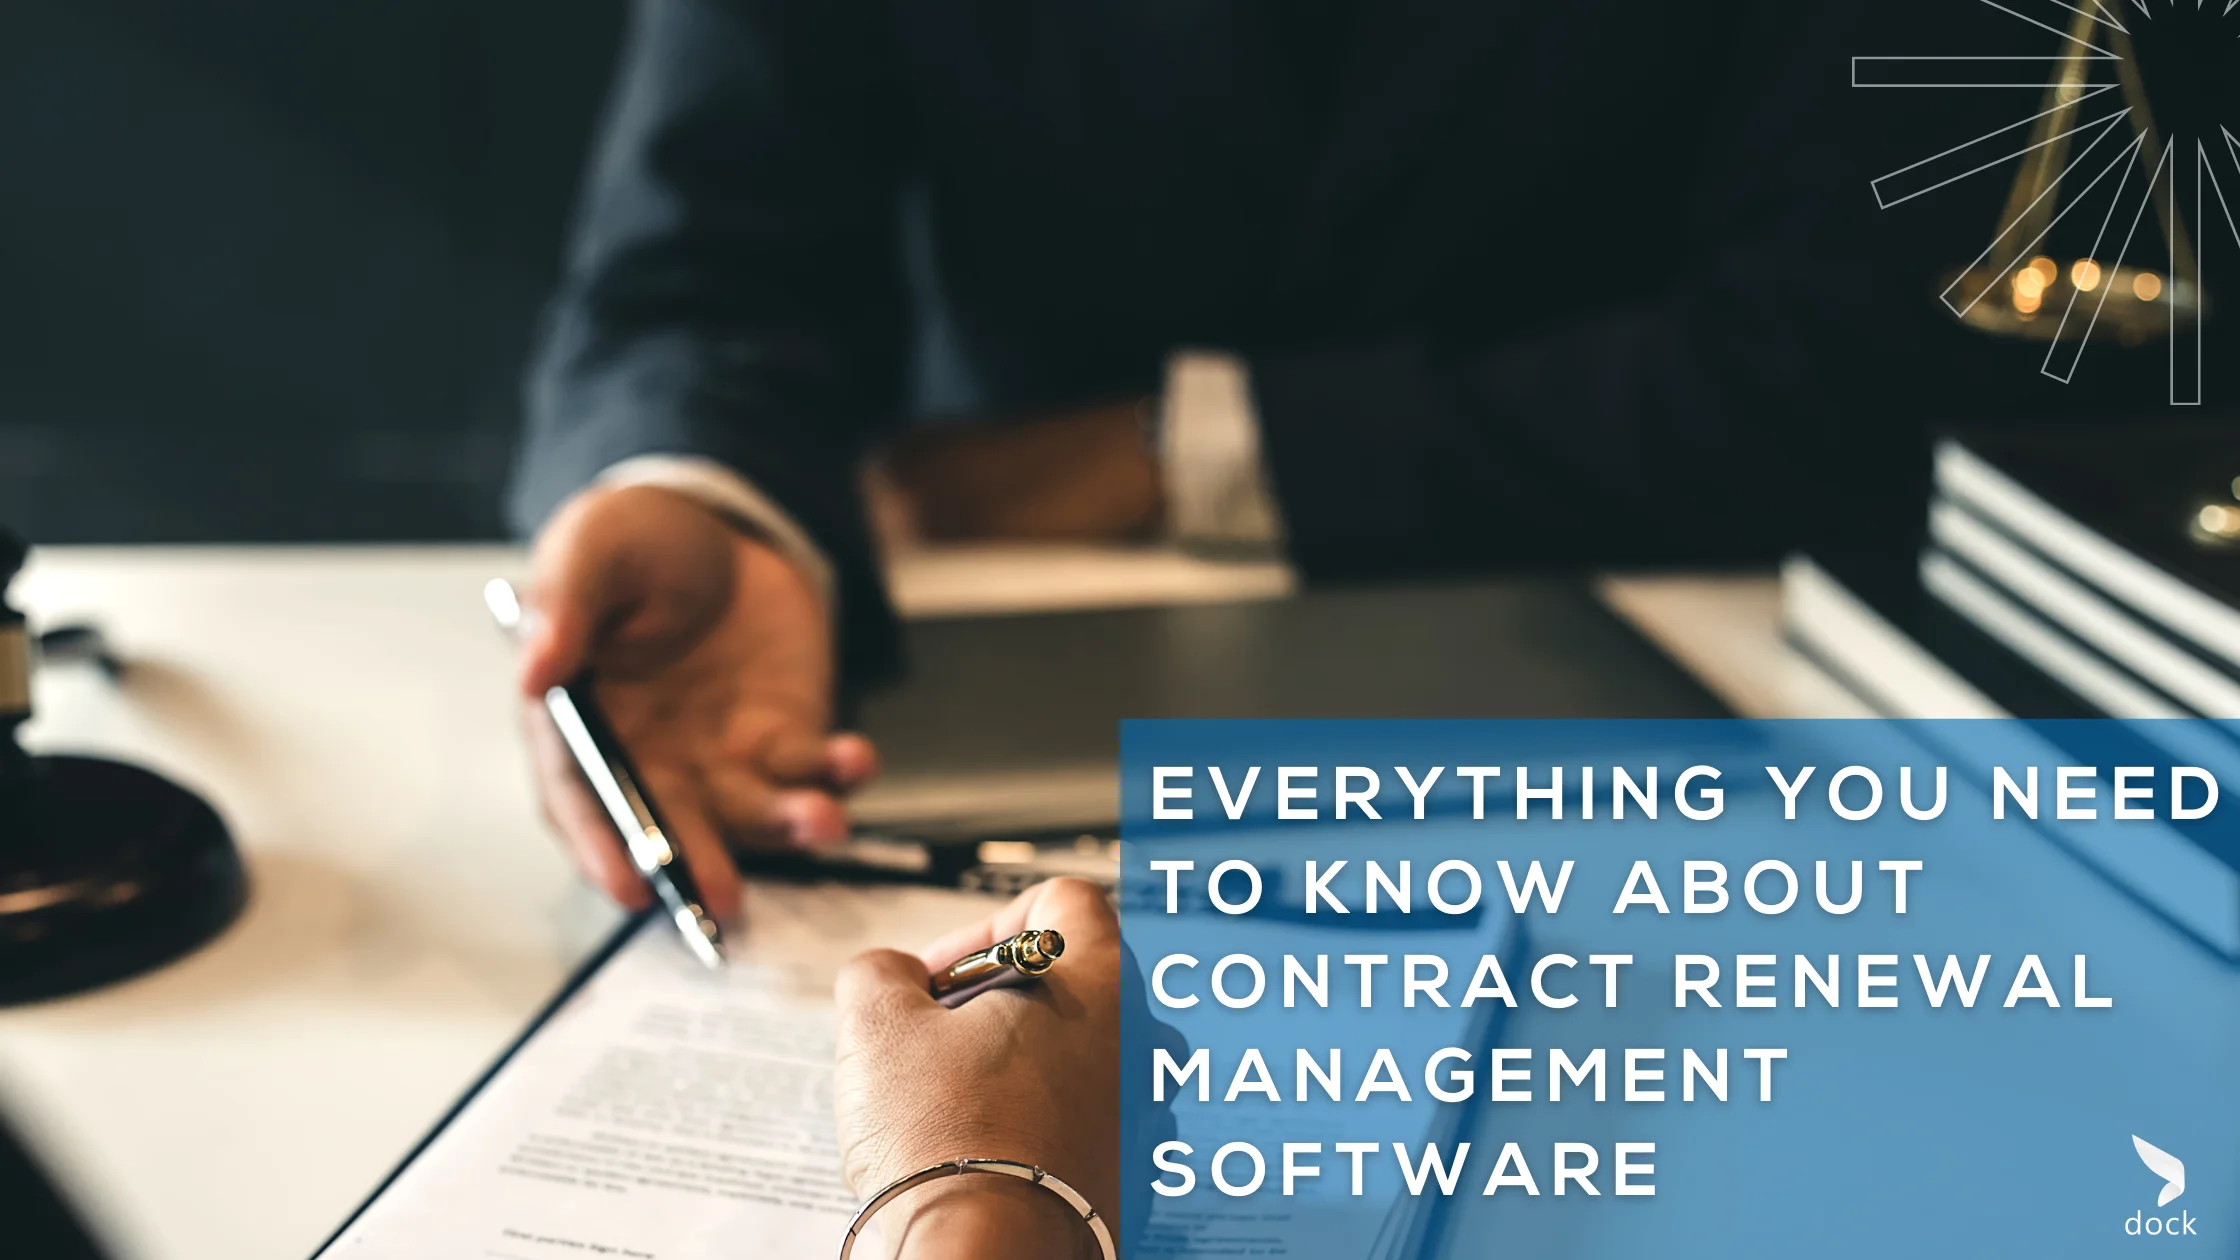 Everything you need to know about contract renewal management software